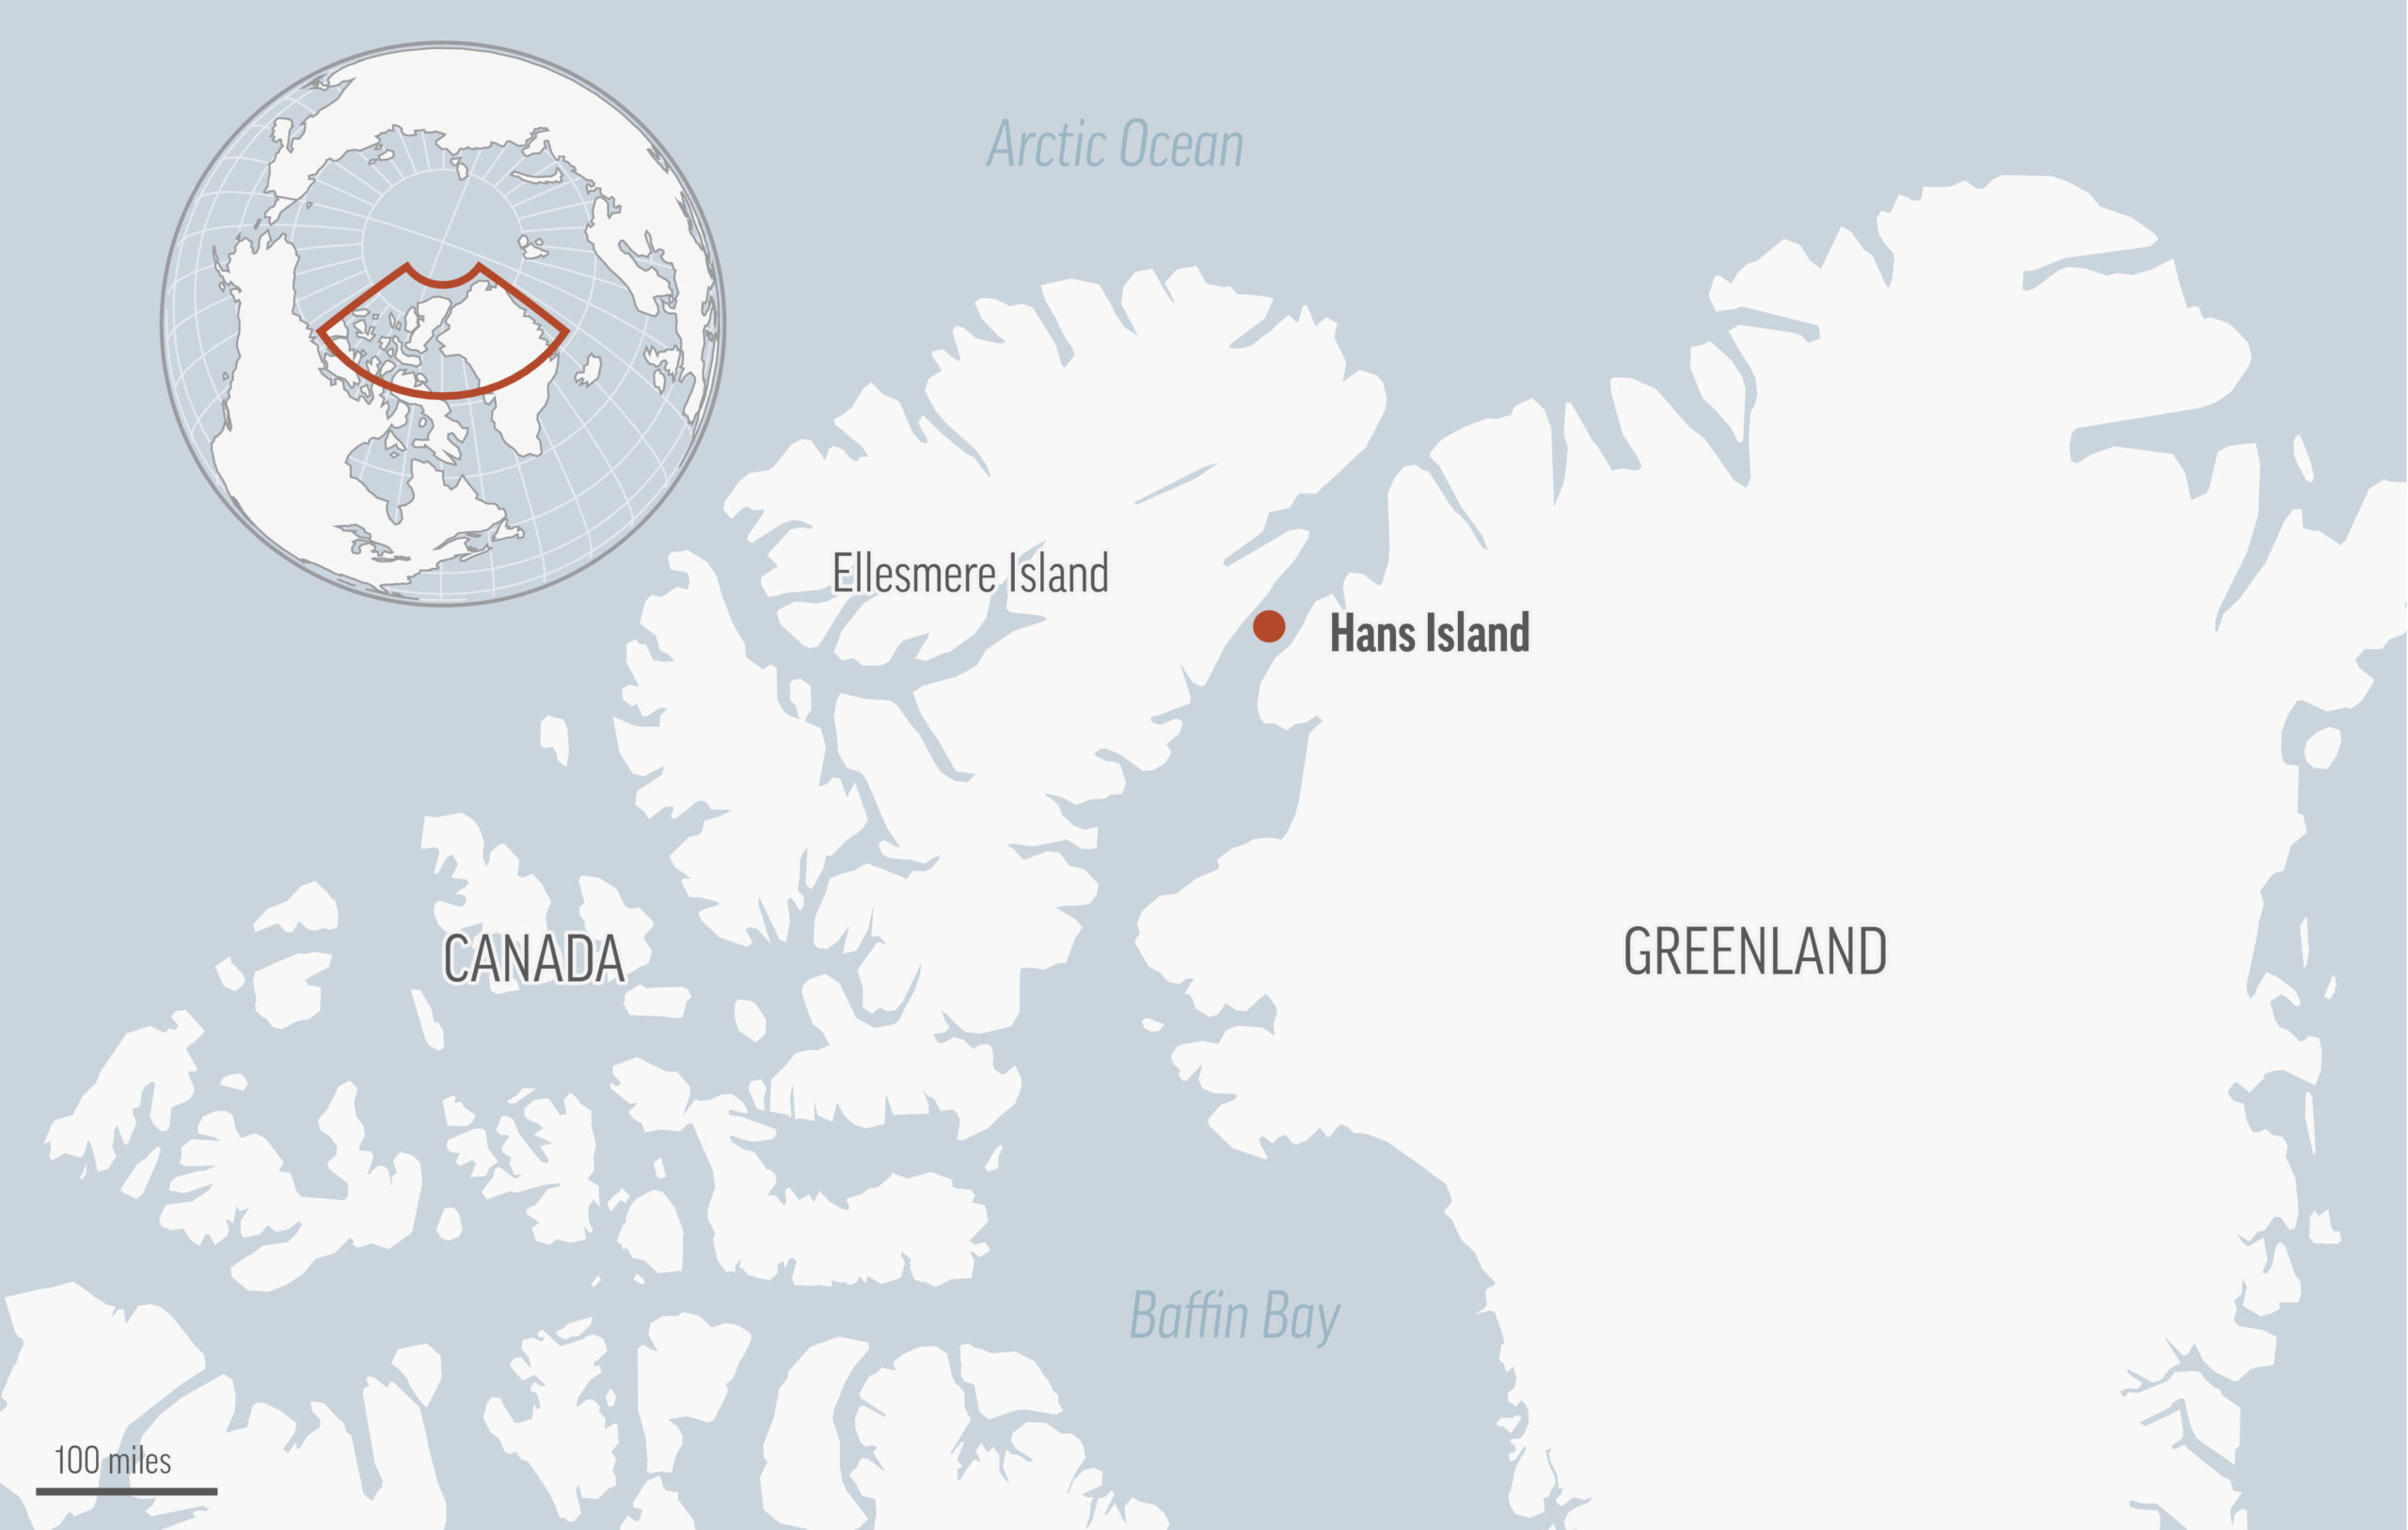 A decades-old dispute between Denmark and Canada over a tiny, barren and uninhabited rock in the Arctic has come to an end.